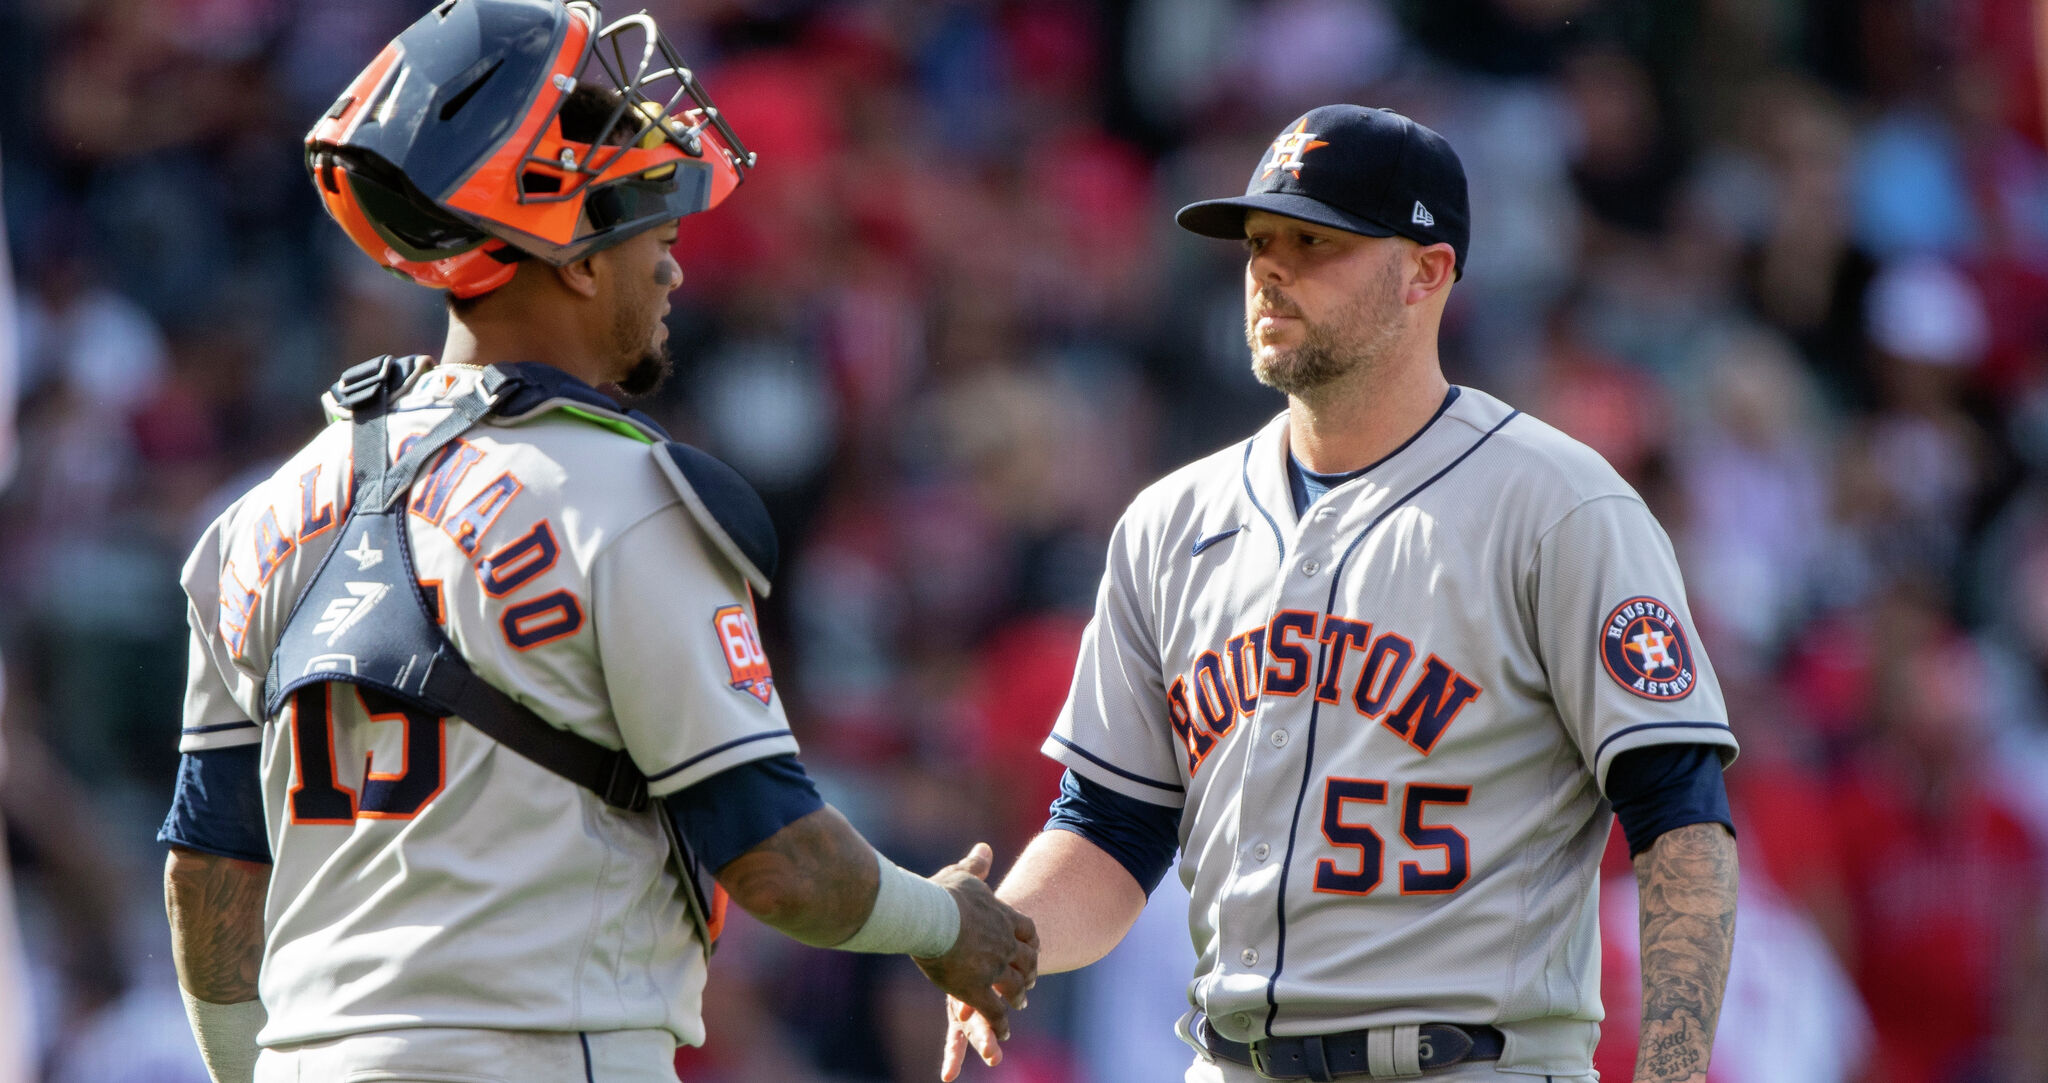 Astros pitcher Ryan Pressly expected to return 'very soon